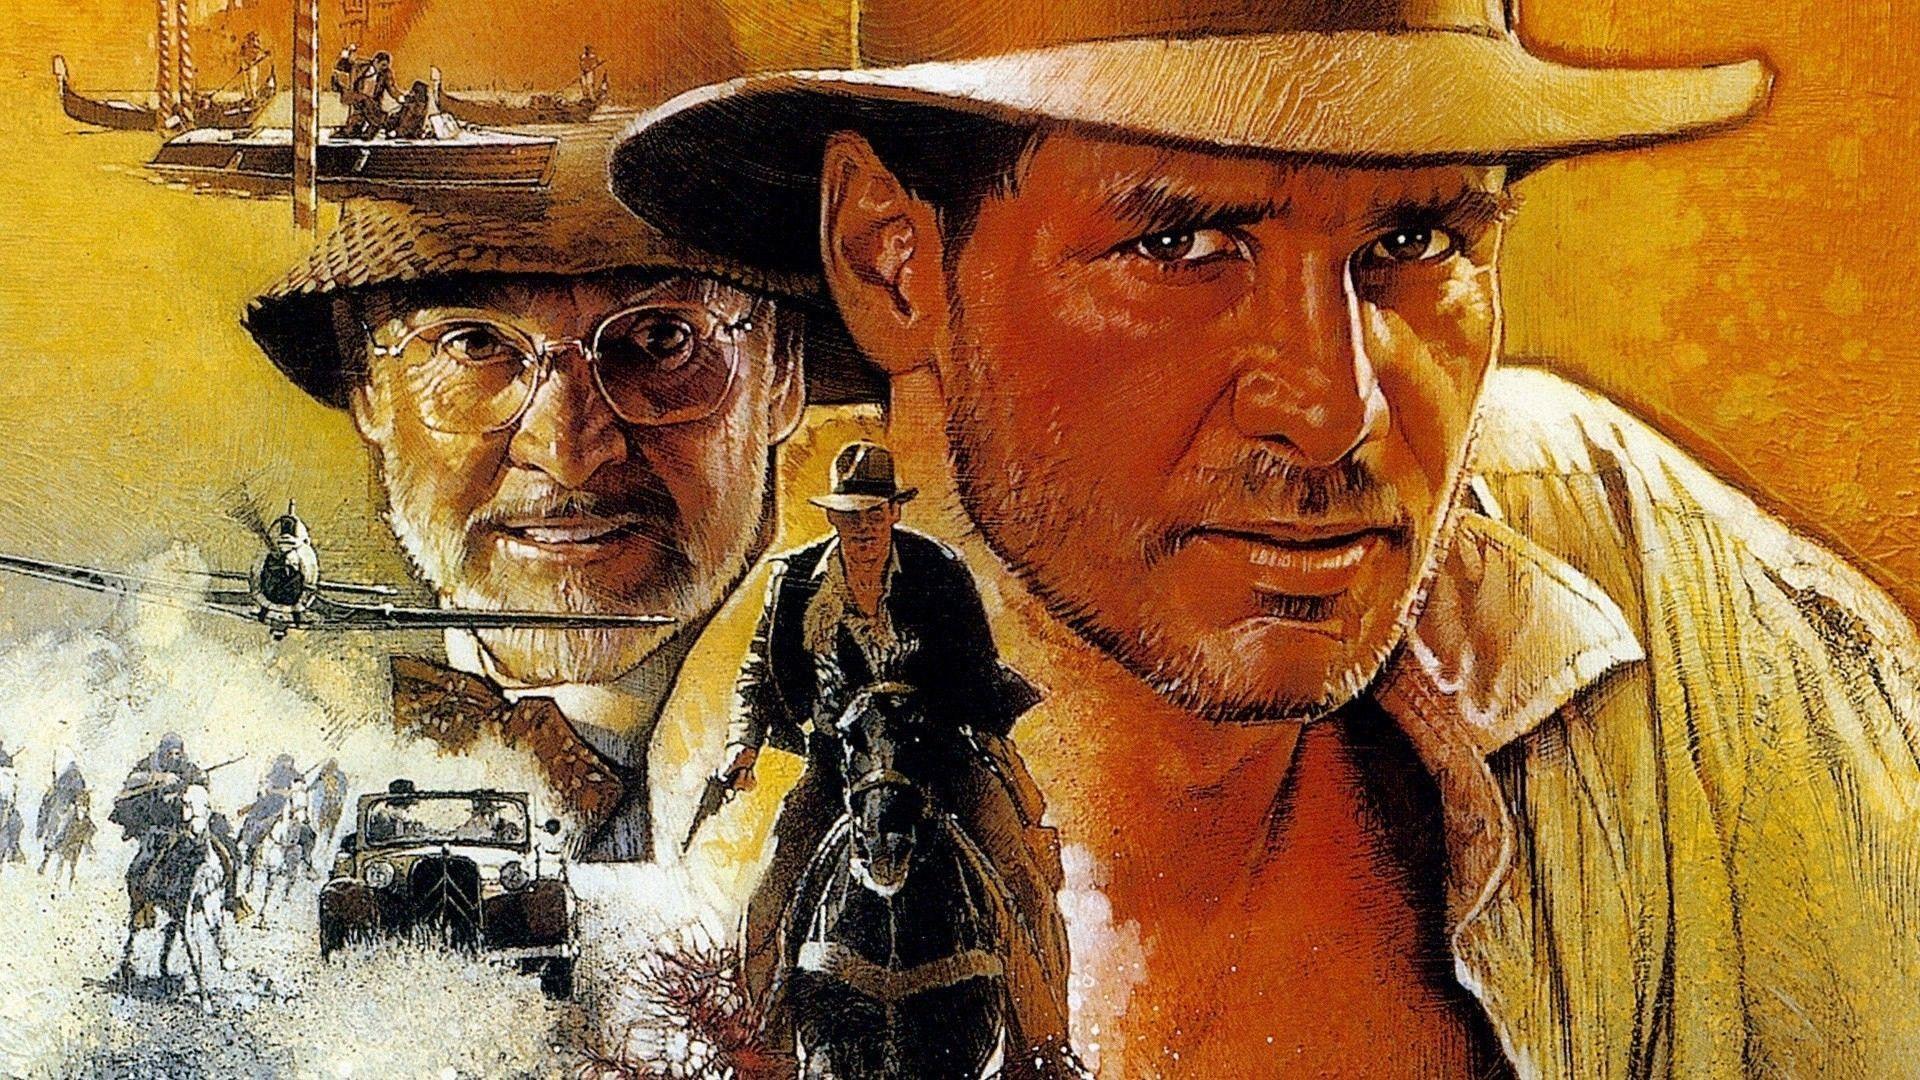 Indiana Jones and the Last Crusade Wallpaper for Samsung, iphone